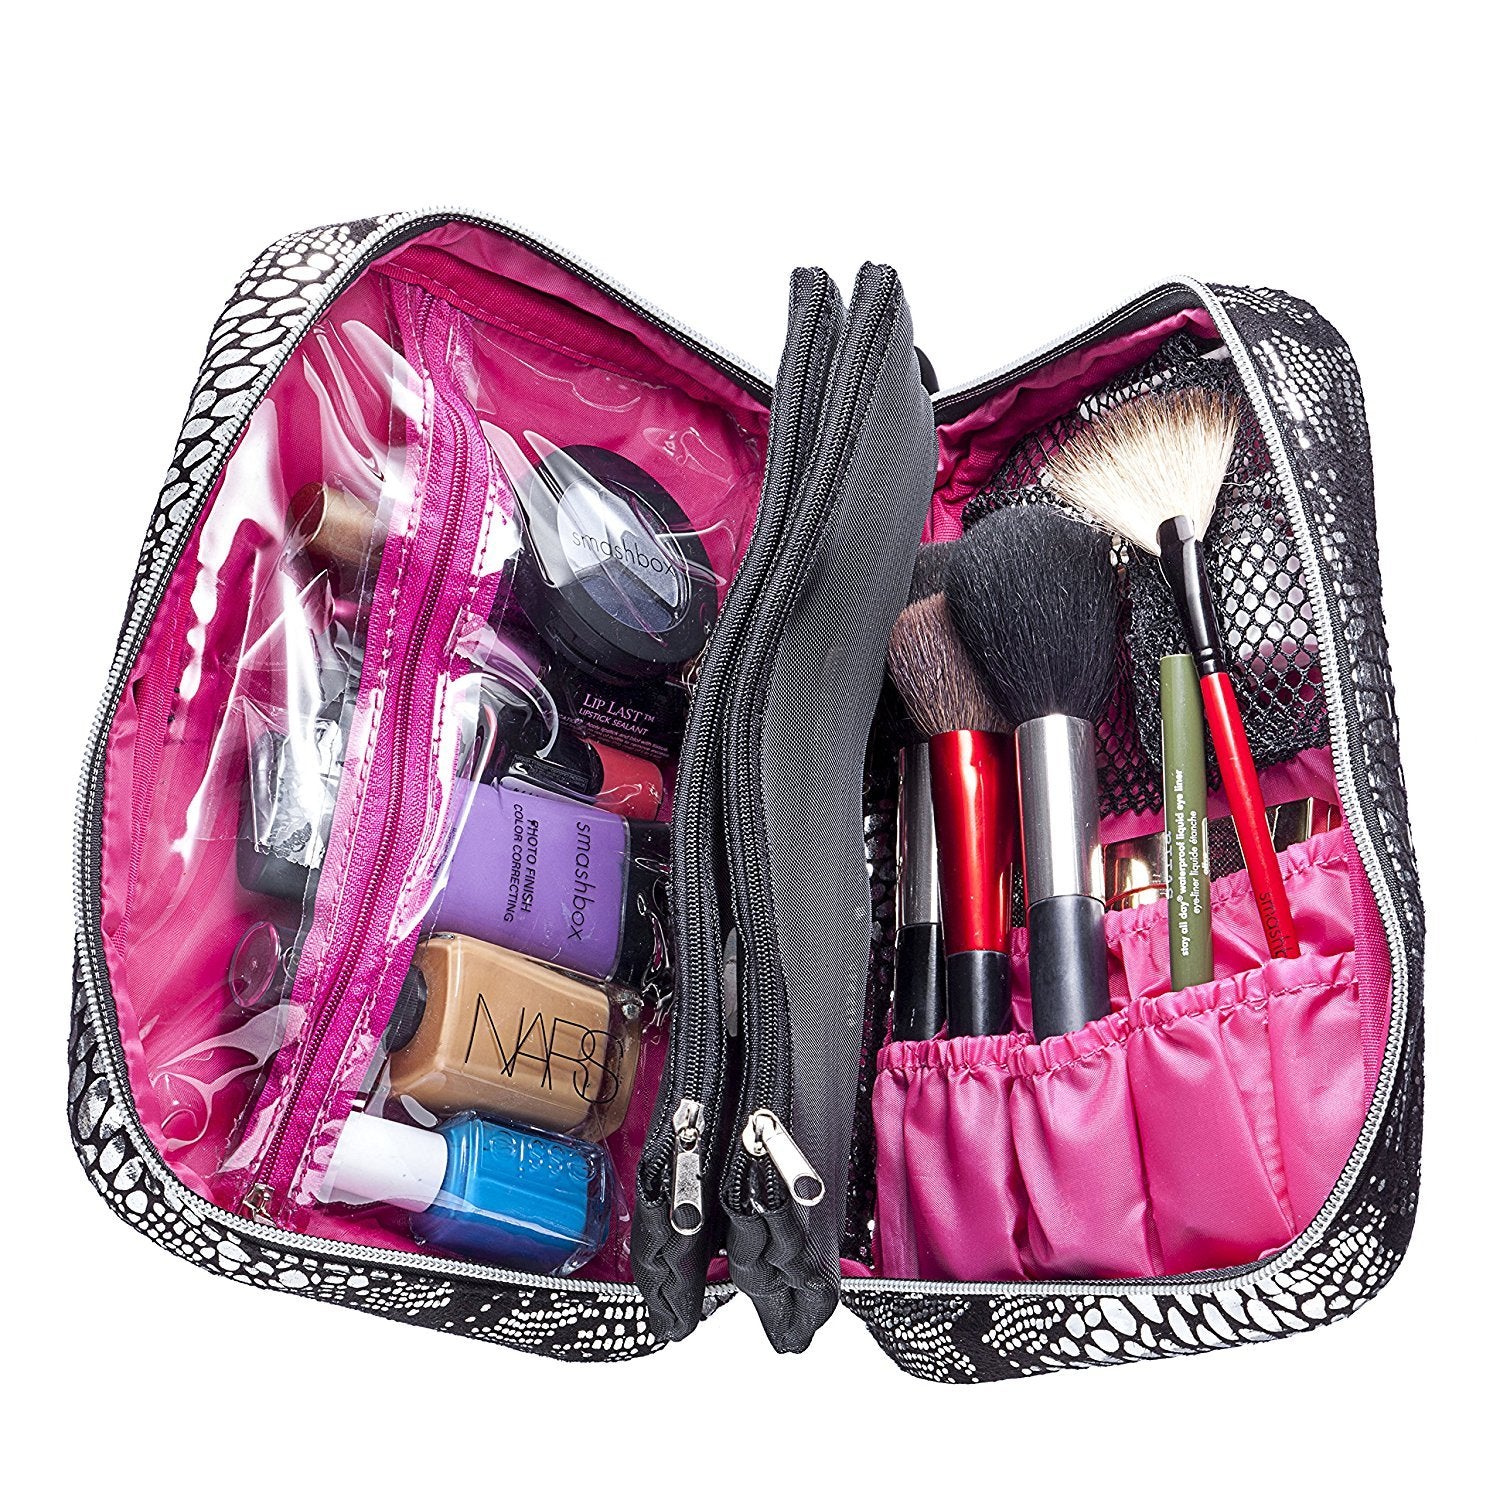 Makeup Bag can hold a lot if needed!! fit all of this and 3 bdc in